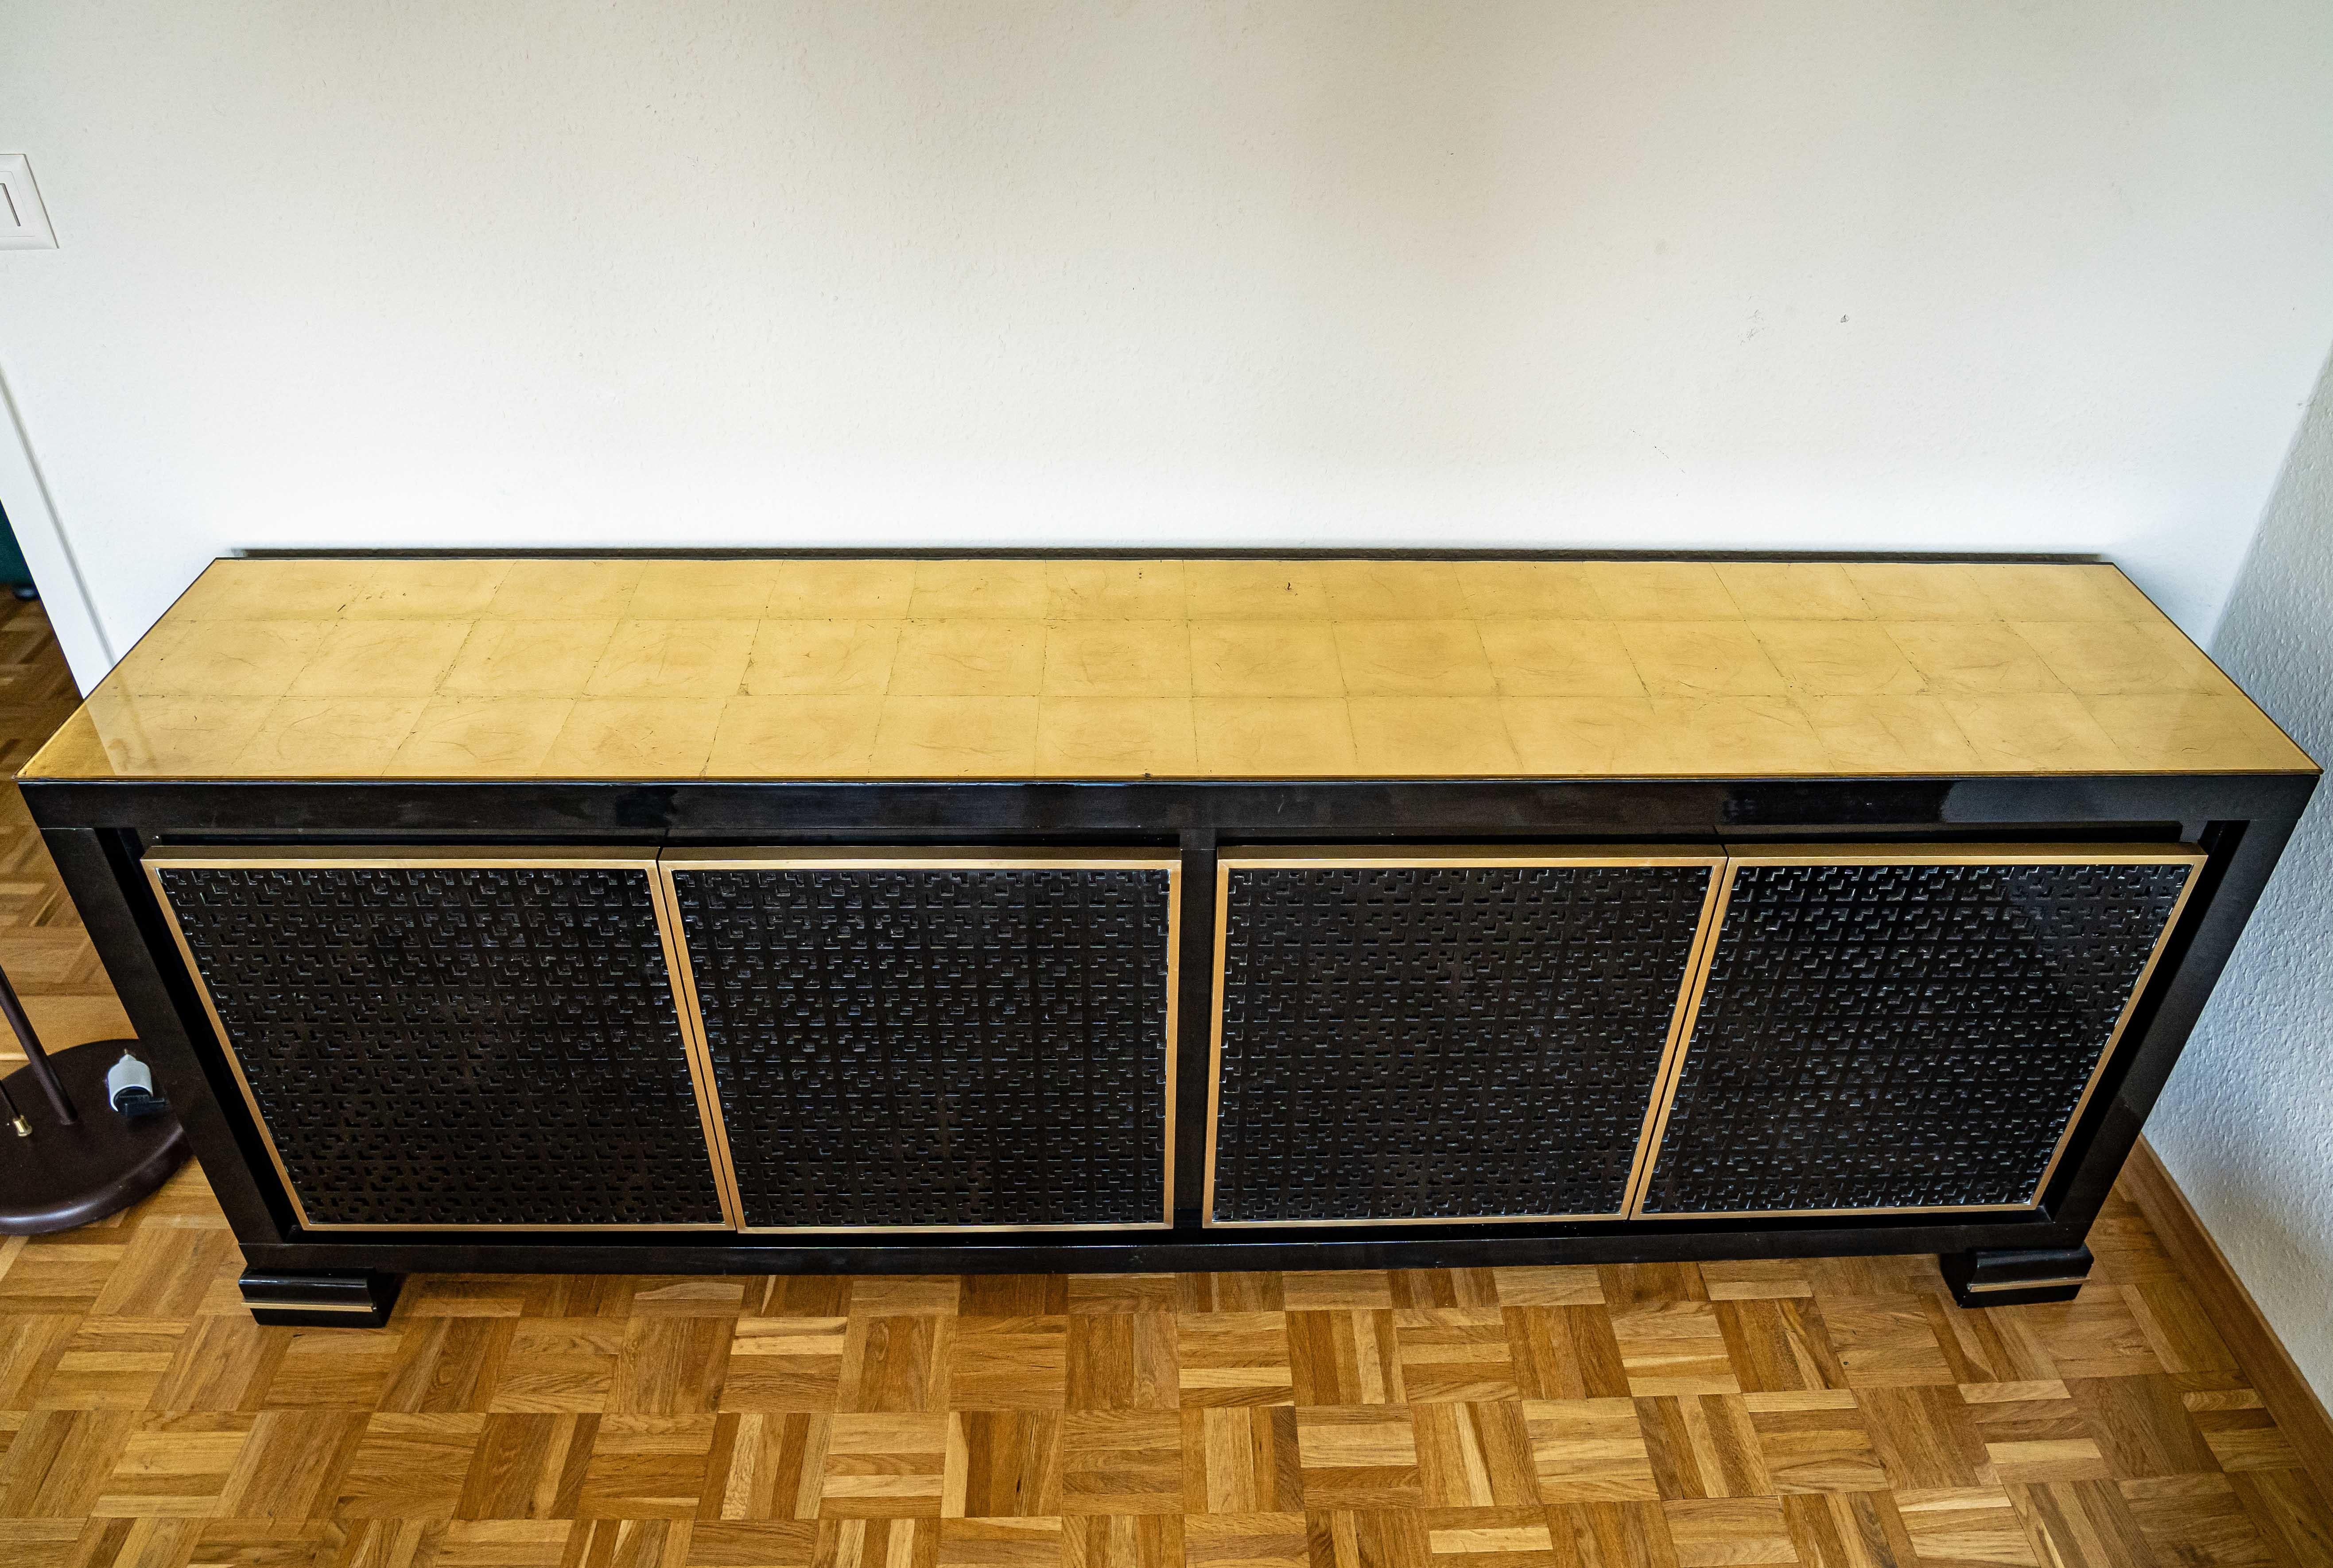 Midcentury black lacquered credenza with a sets of drawers and shelves, red lacquered inside.
Gold leaf glass top.